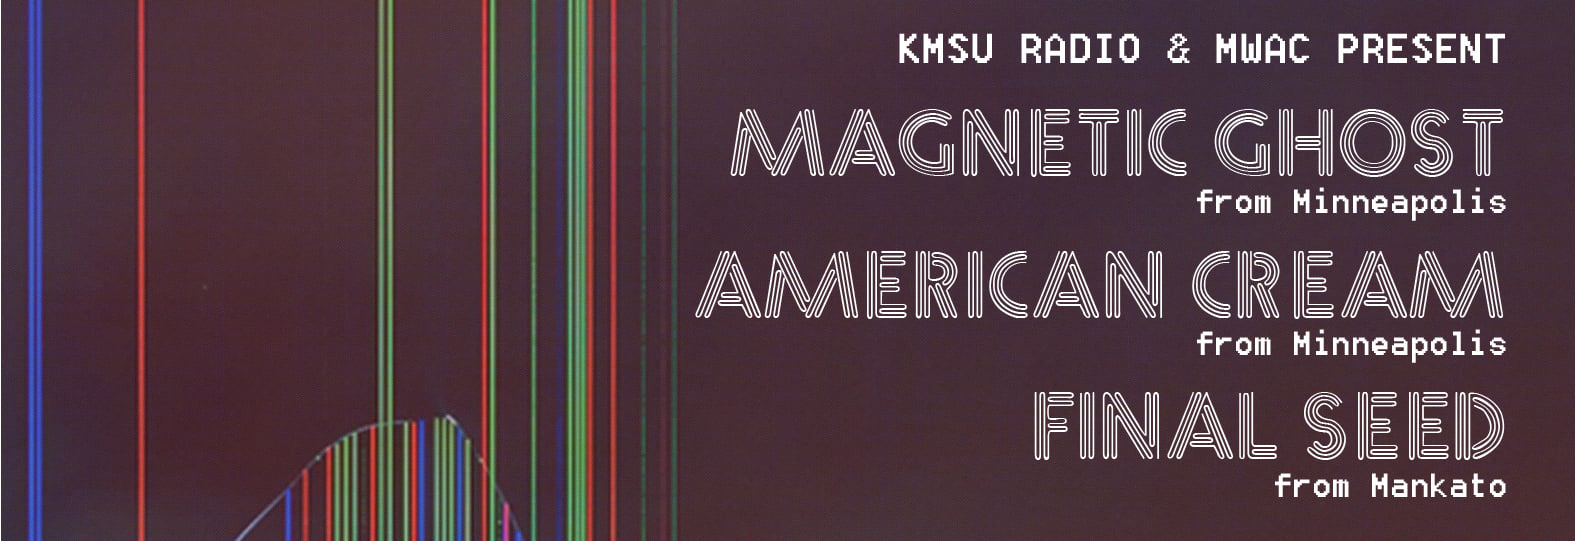 KMSU Radio & MWAC present Magnetic Fields, American Cream, & Final Seed at the 410 Project on Saturday, February 25th!